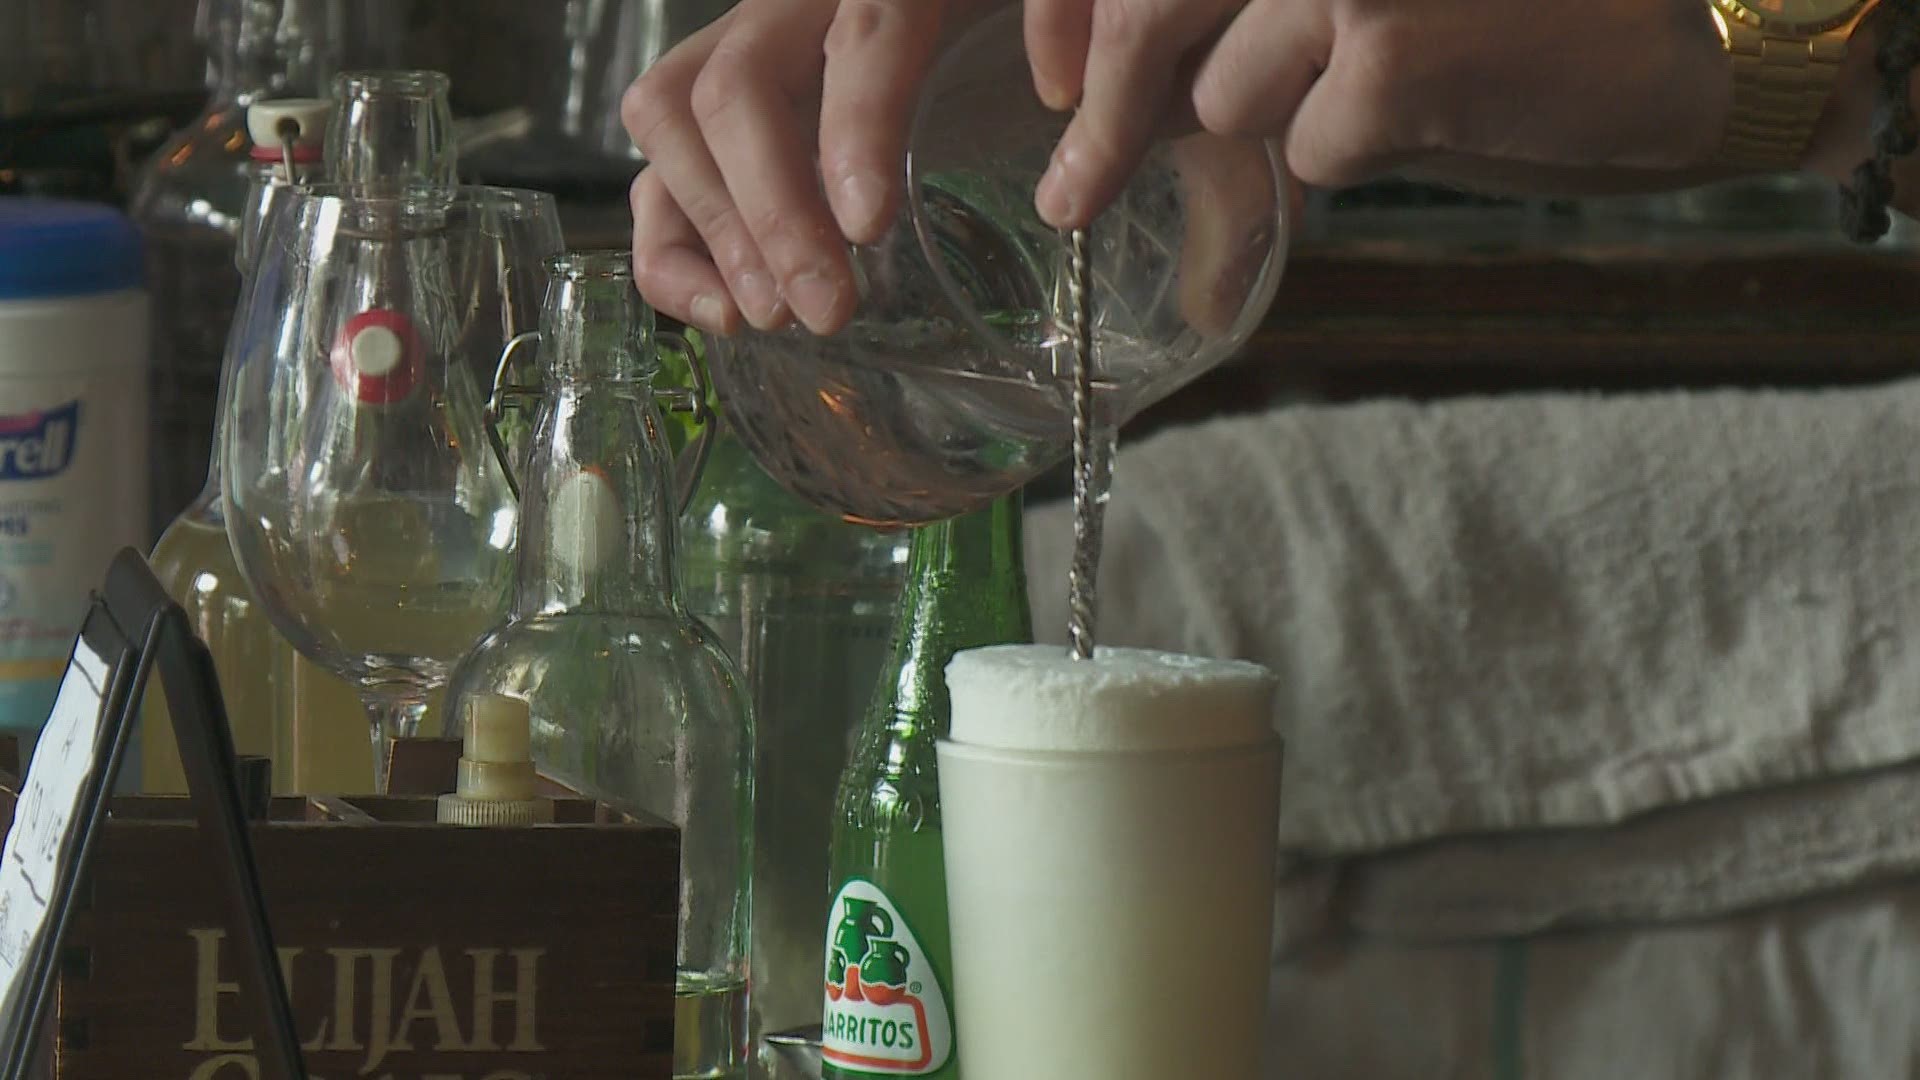 New Orleans bars are now able to stay open and serve drinks until 1 a.m. but bar owners did not expect to be understaffed when business came back.